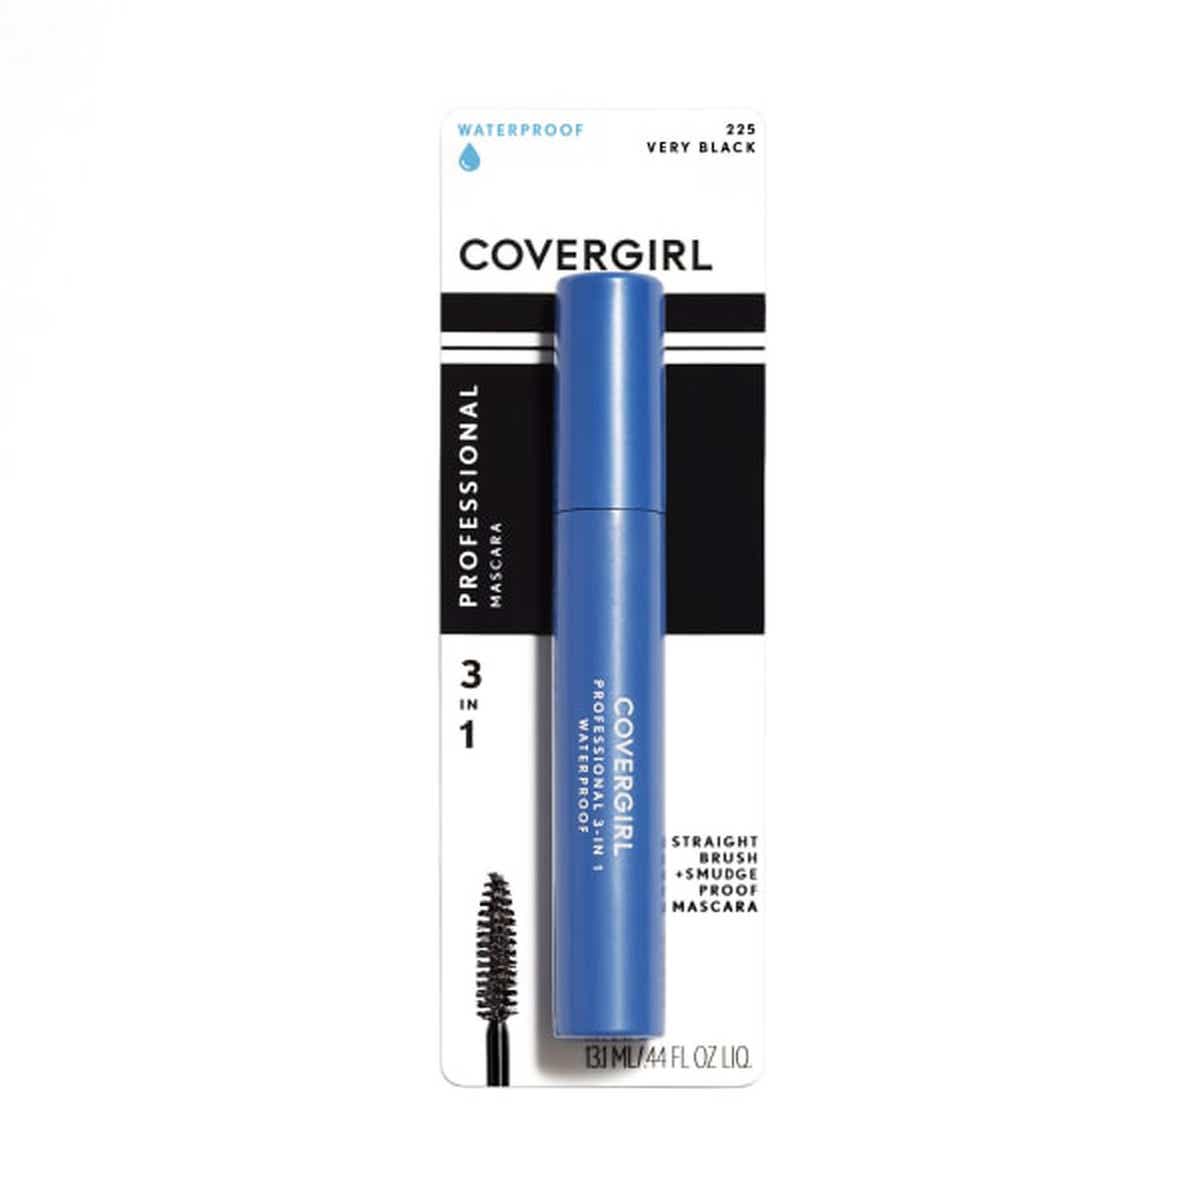 COVERGIRL PRO 3-N-1 Water Proof Mascara